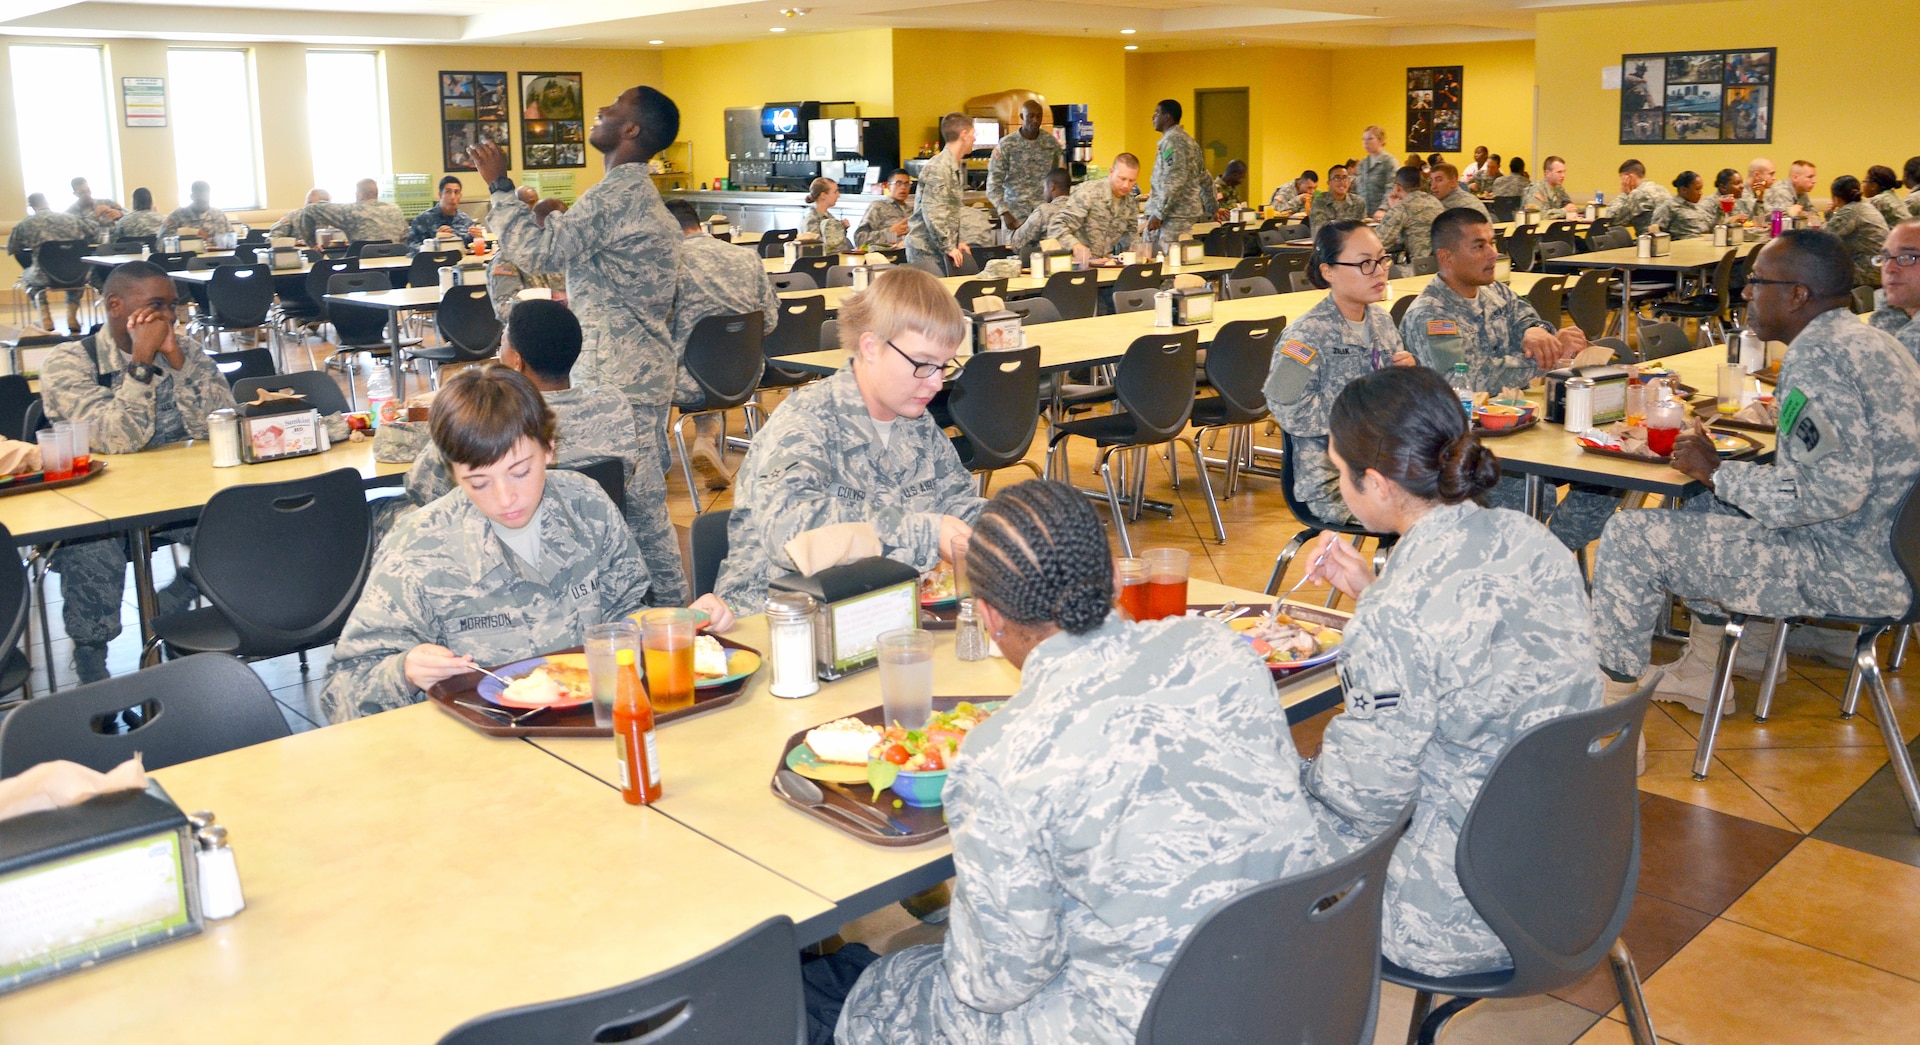 The Slagel Dining Facility takes up approximately 60,000 square feet over two floors and is built to serve 4,800 personnel in 90 minutes. It provides three meals daily to thousands of Soldiers, Sailors, Marines and Airmen attending training at the Medical Education and Training Campus. (Photo by Esther Garcia, U.S. Army Medical Department Center & School Public Affairs)